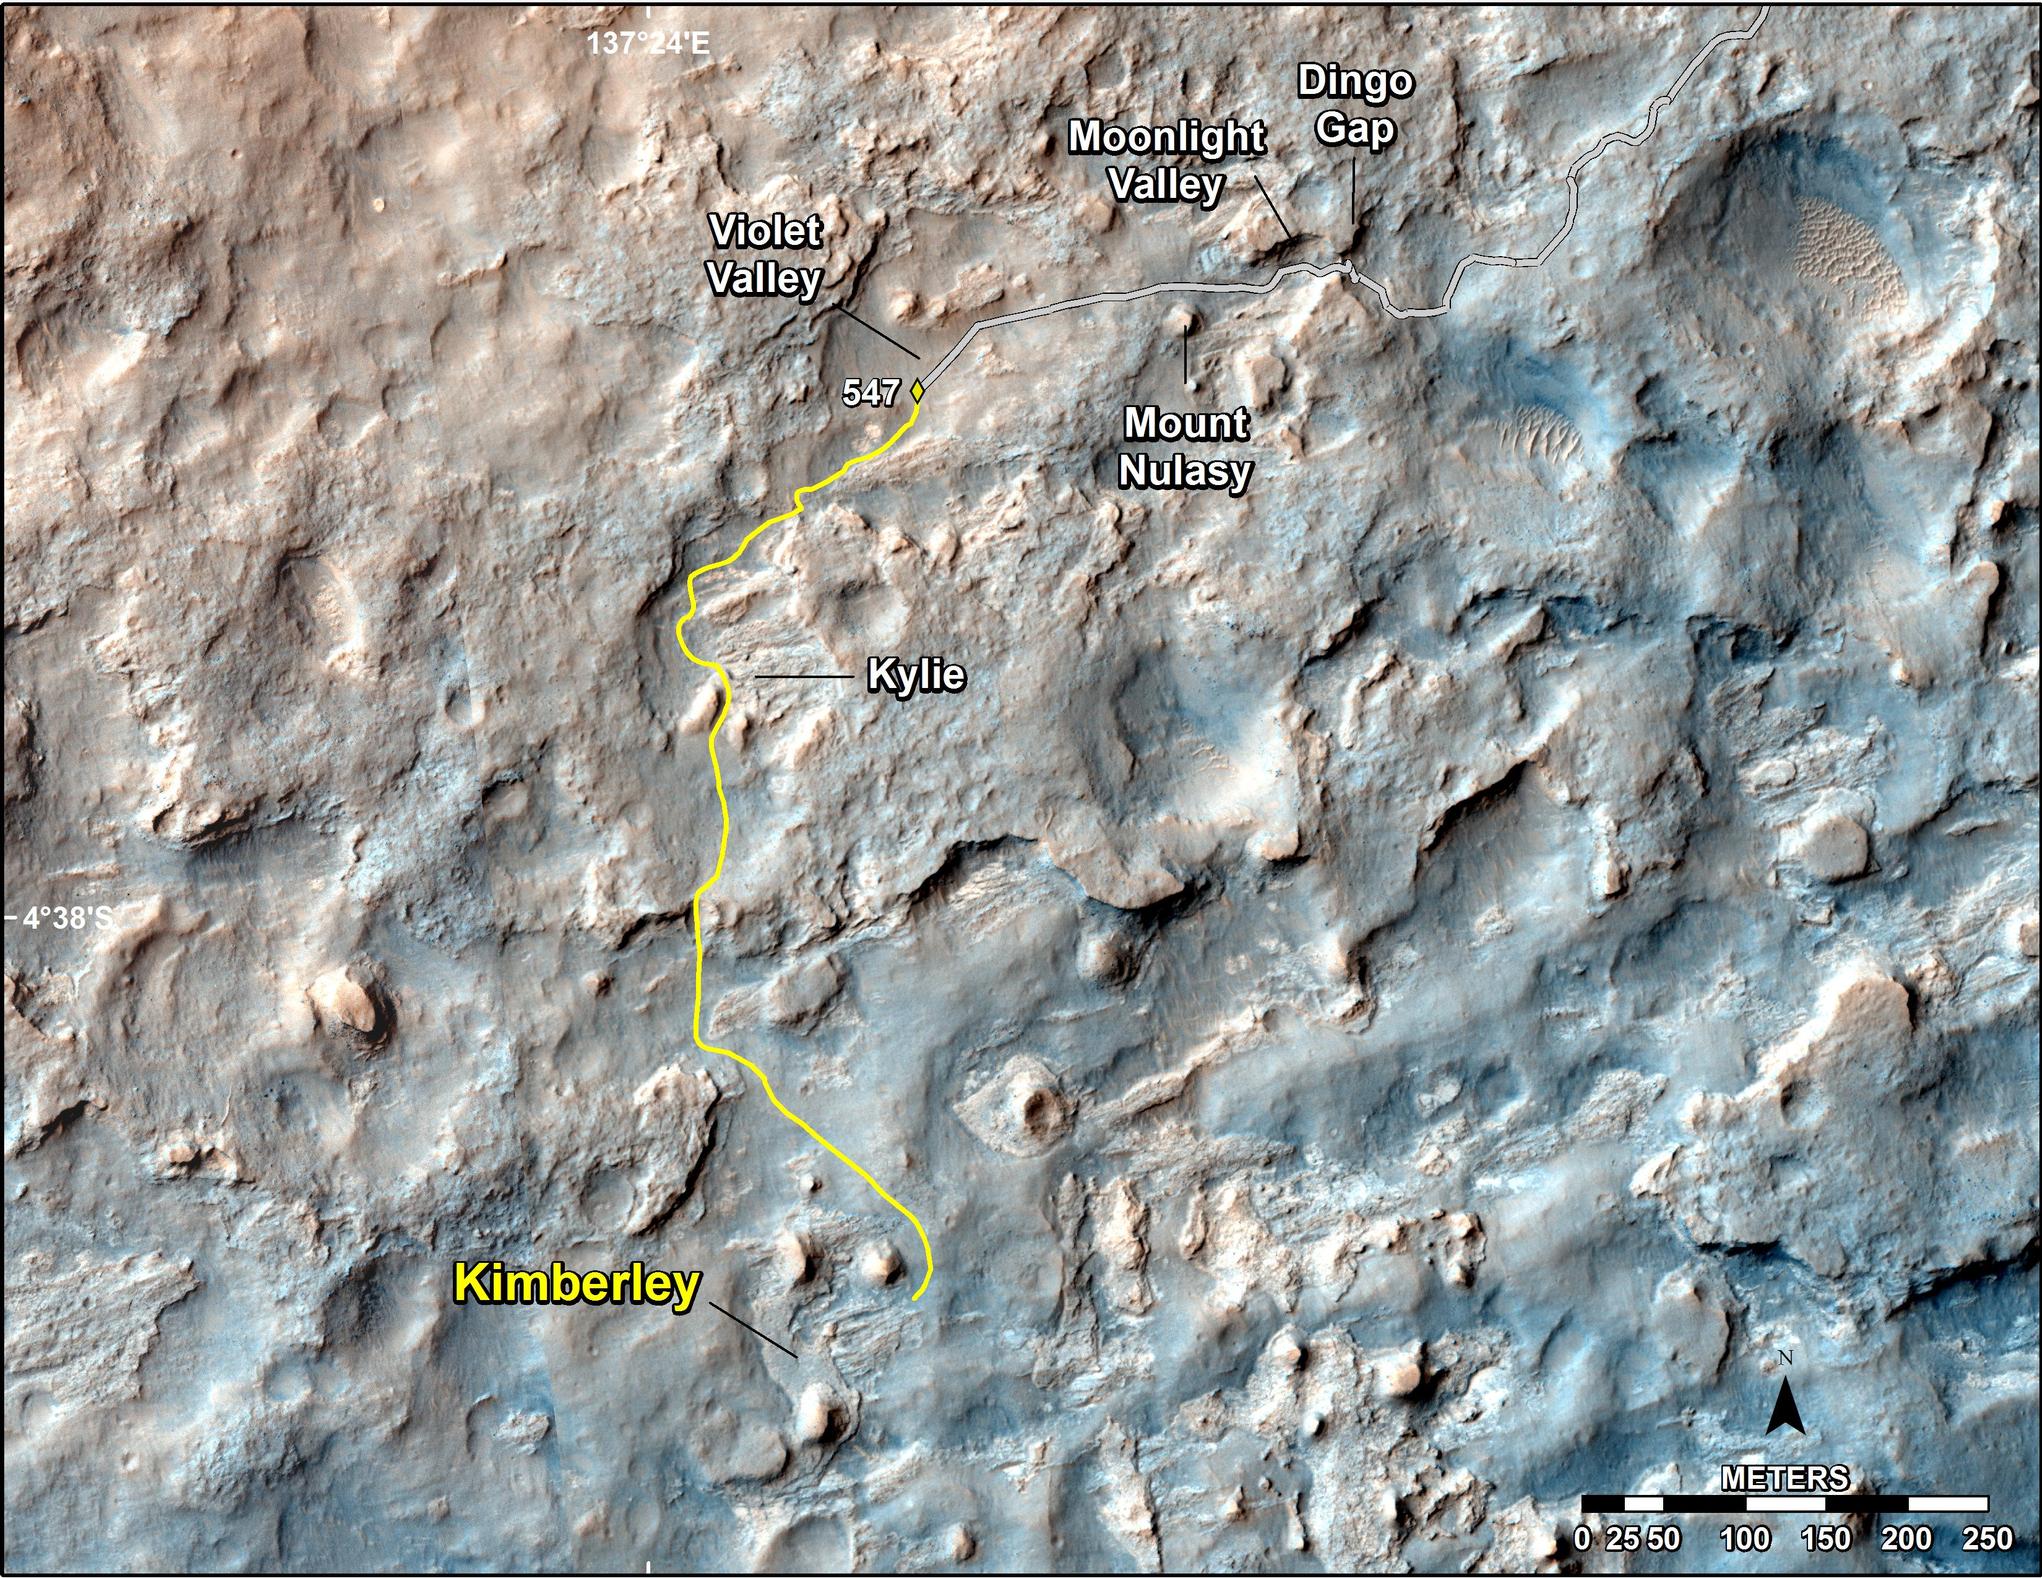 This map shows the route driven and route planned for NASA's Curiosity Mars rover from before reaching